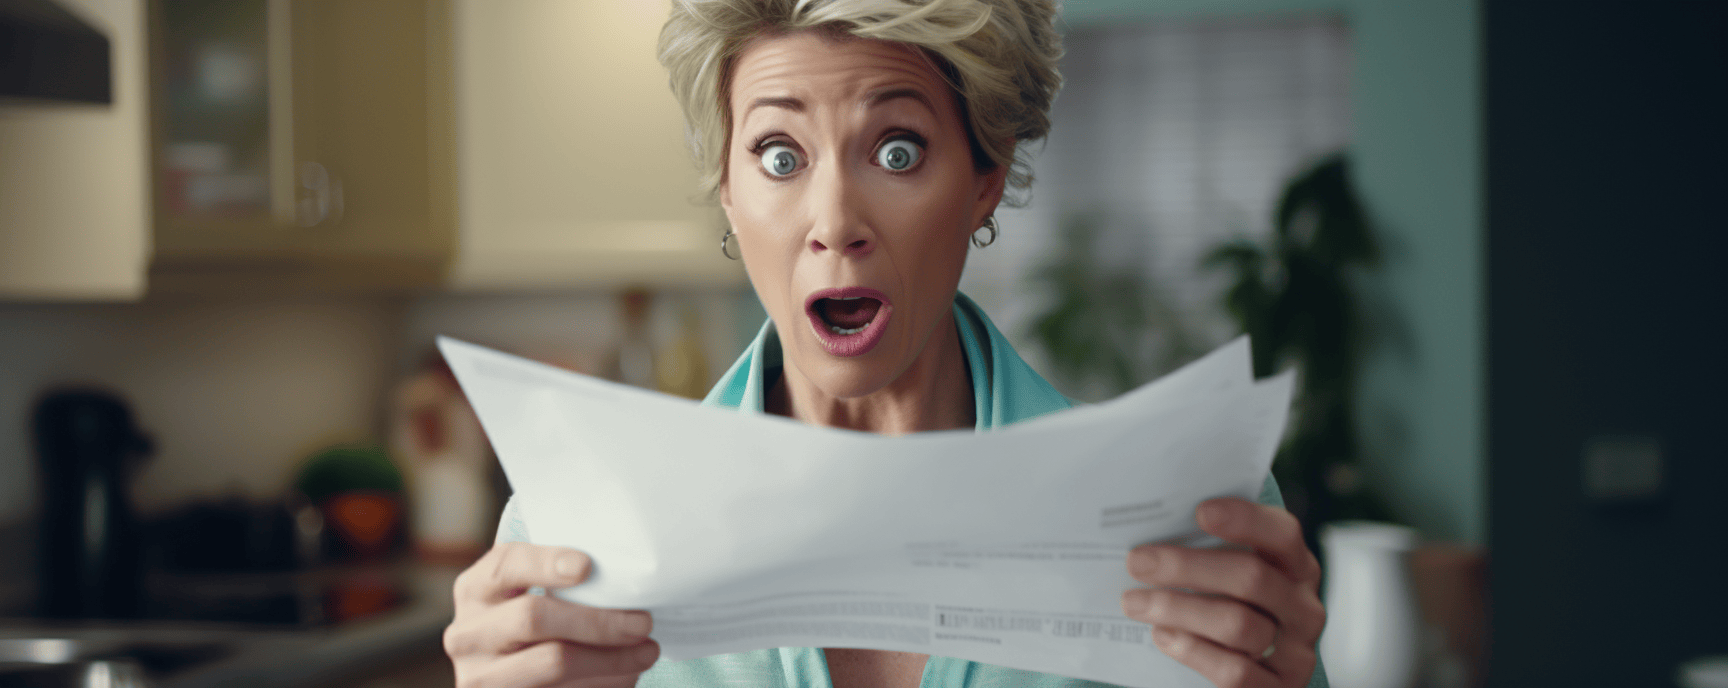 Woman surprised at medical bill amount.